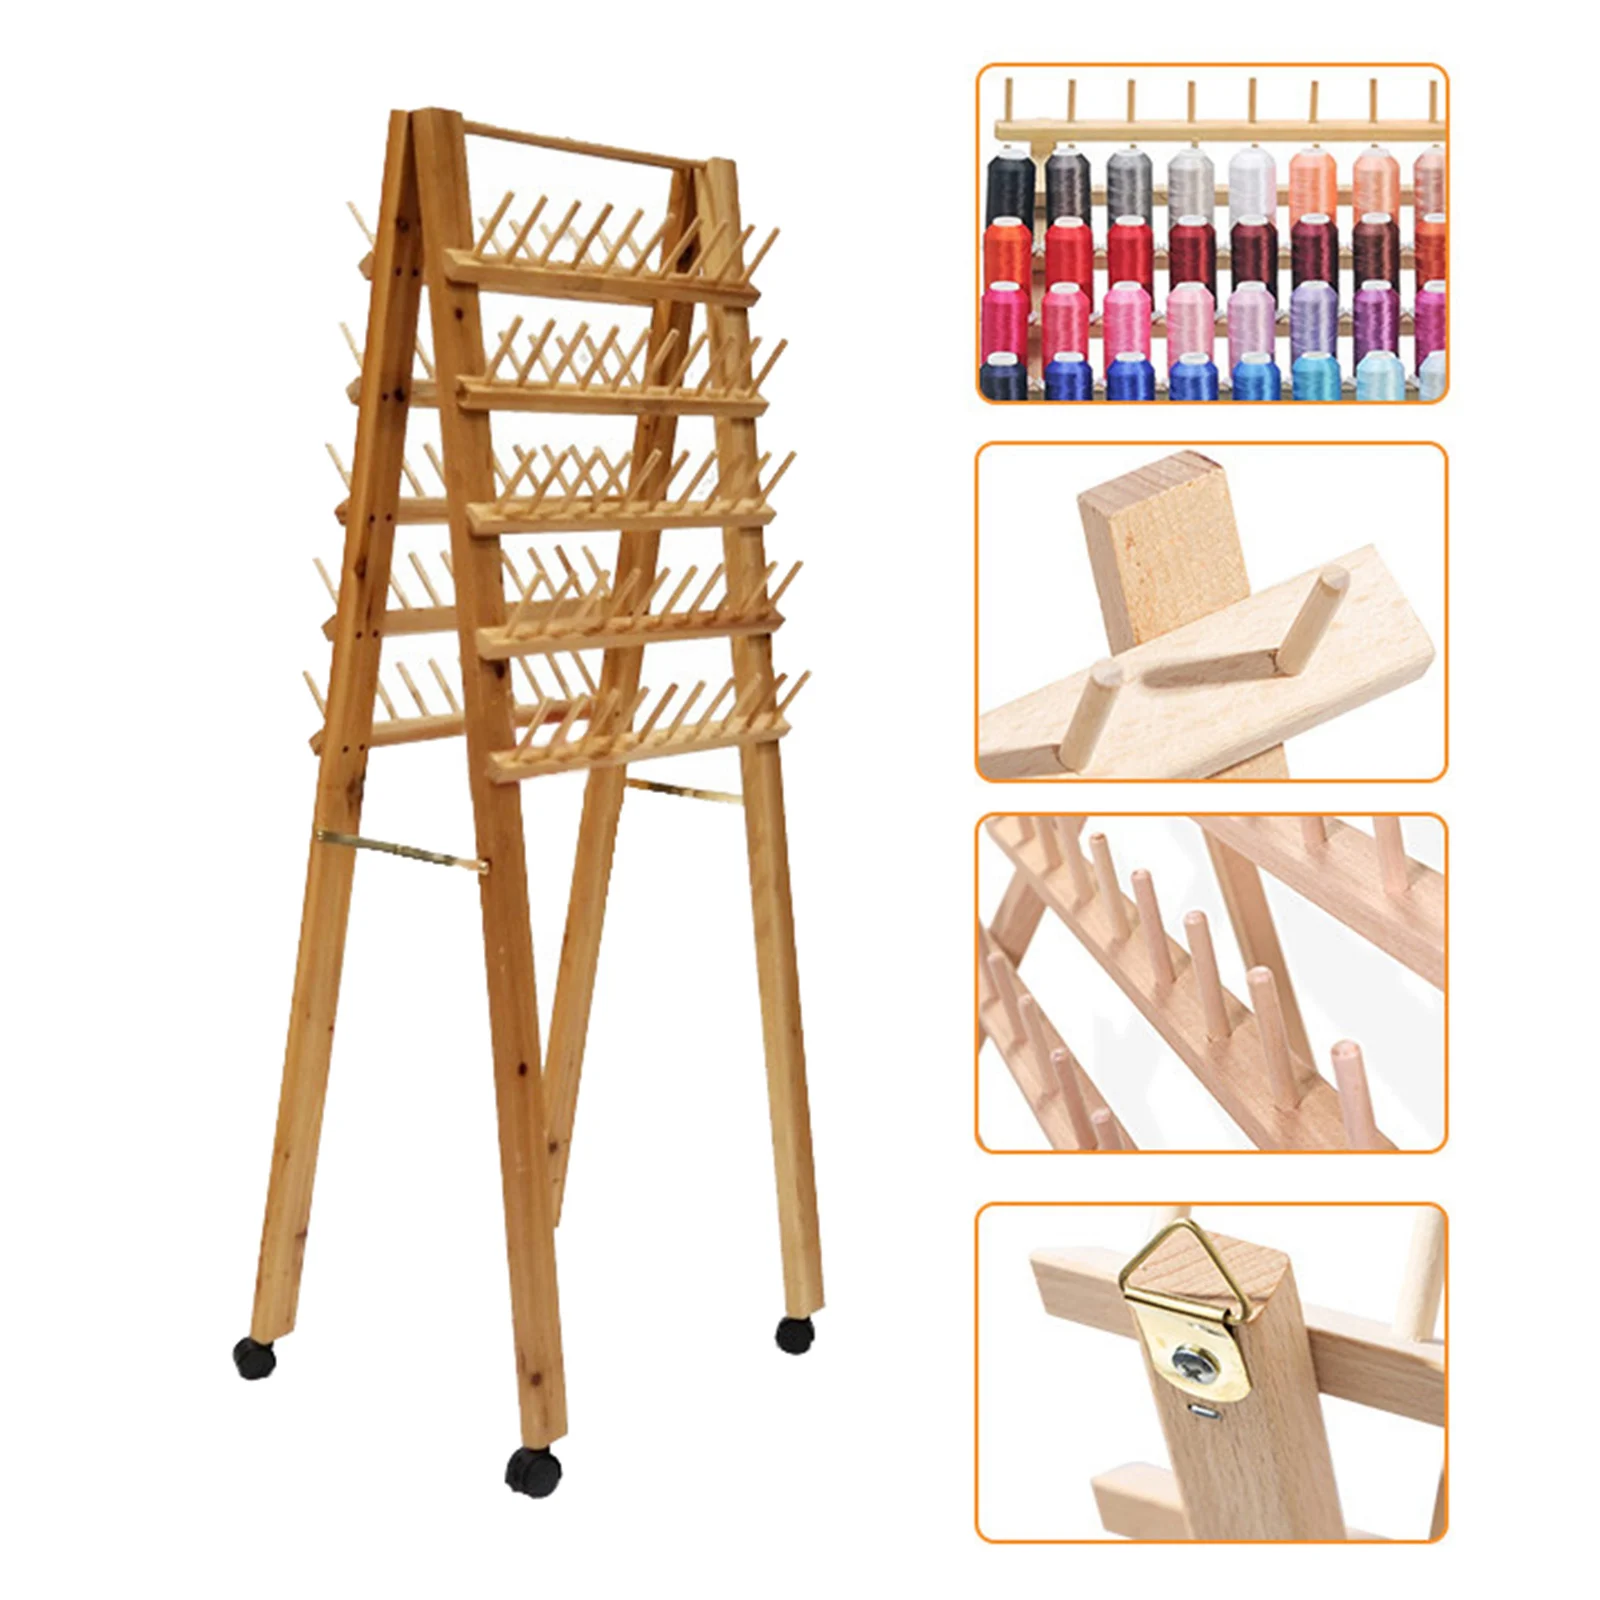 100 Spool Thread Rack Movable Wooden Thread Stand Holder Sewing Thread Organizer Embroidery Sewing Quilting Needle Accessories